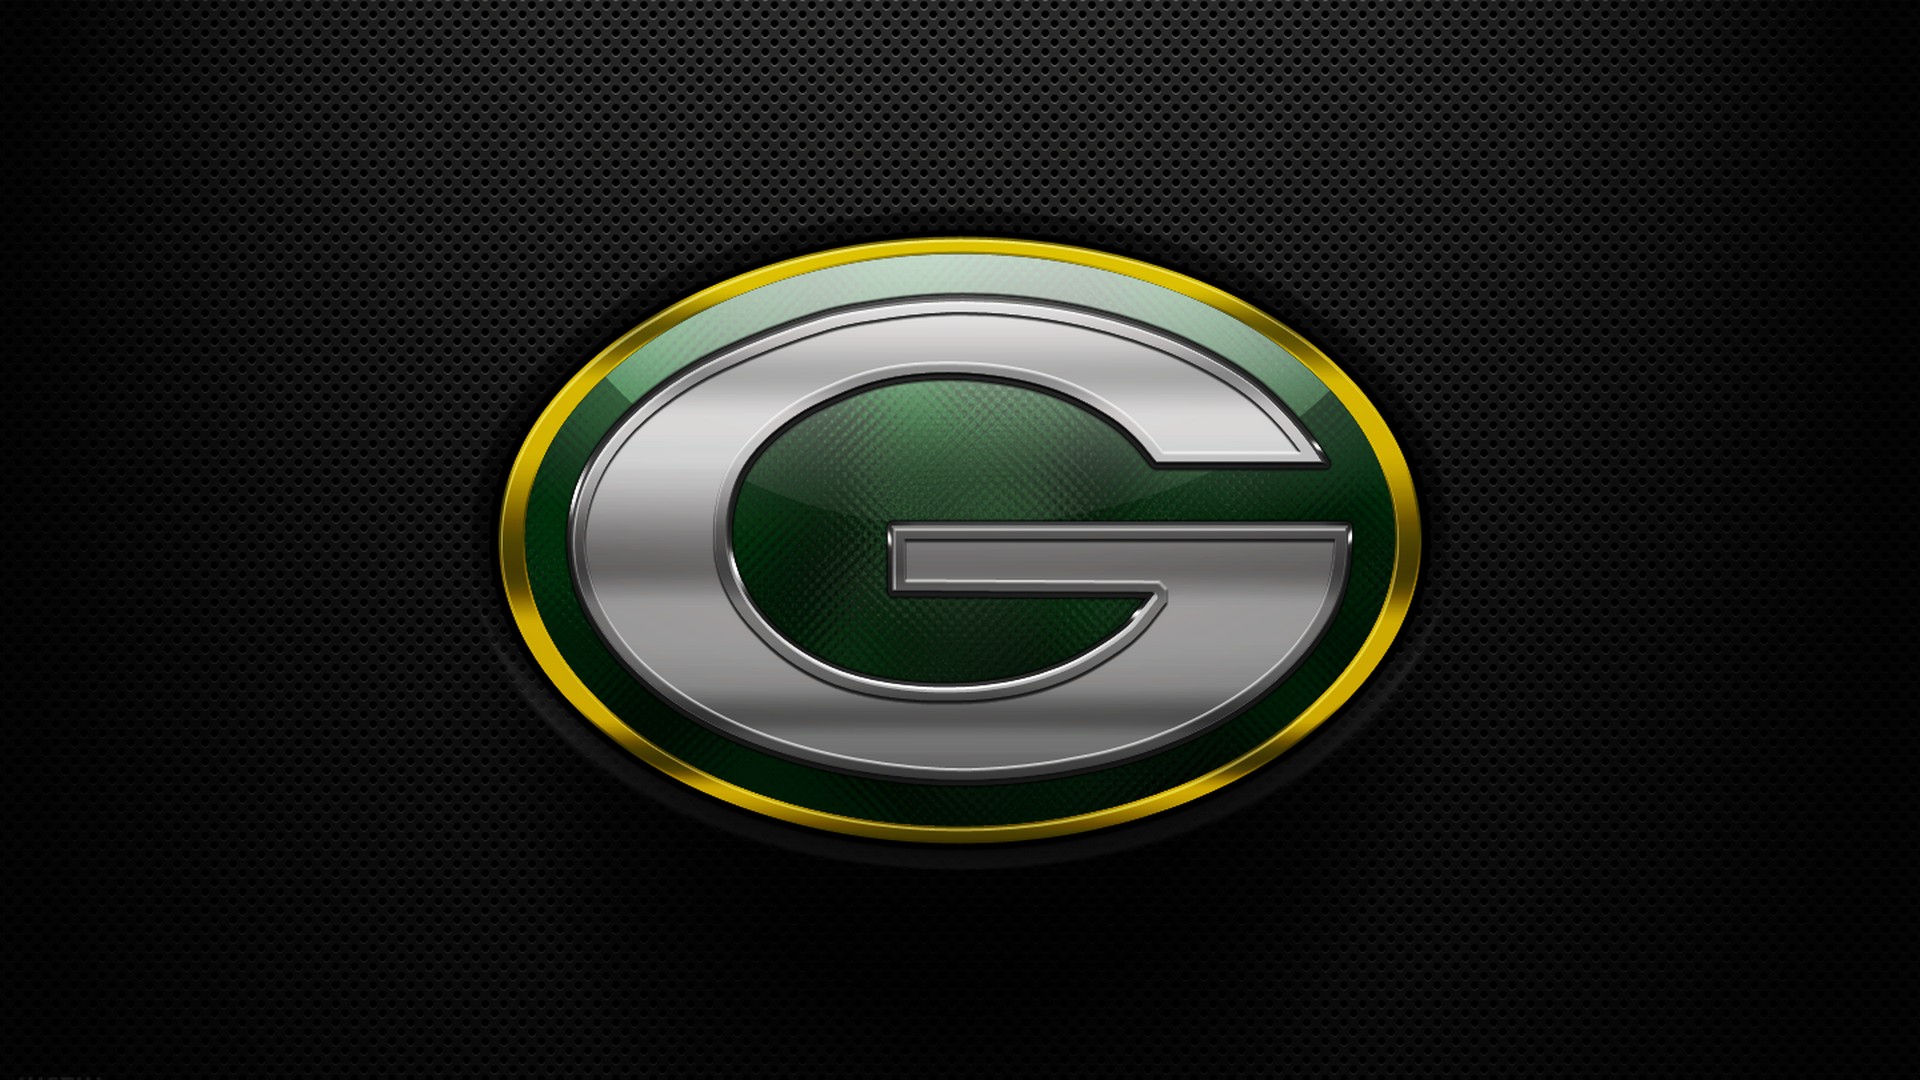 Green Bay Packers NFL HD Wallpapers With Resolution 1920X1080 pixel. You can make this wallpaper for your Mac or Windows Desktop Background, iPhone, Android or Tablet and another Smartphone device for free